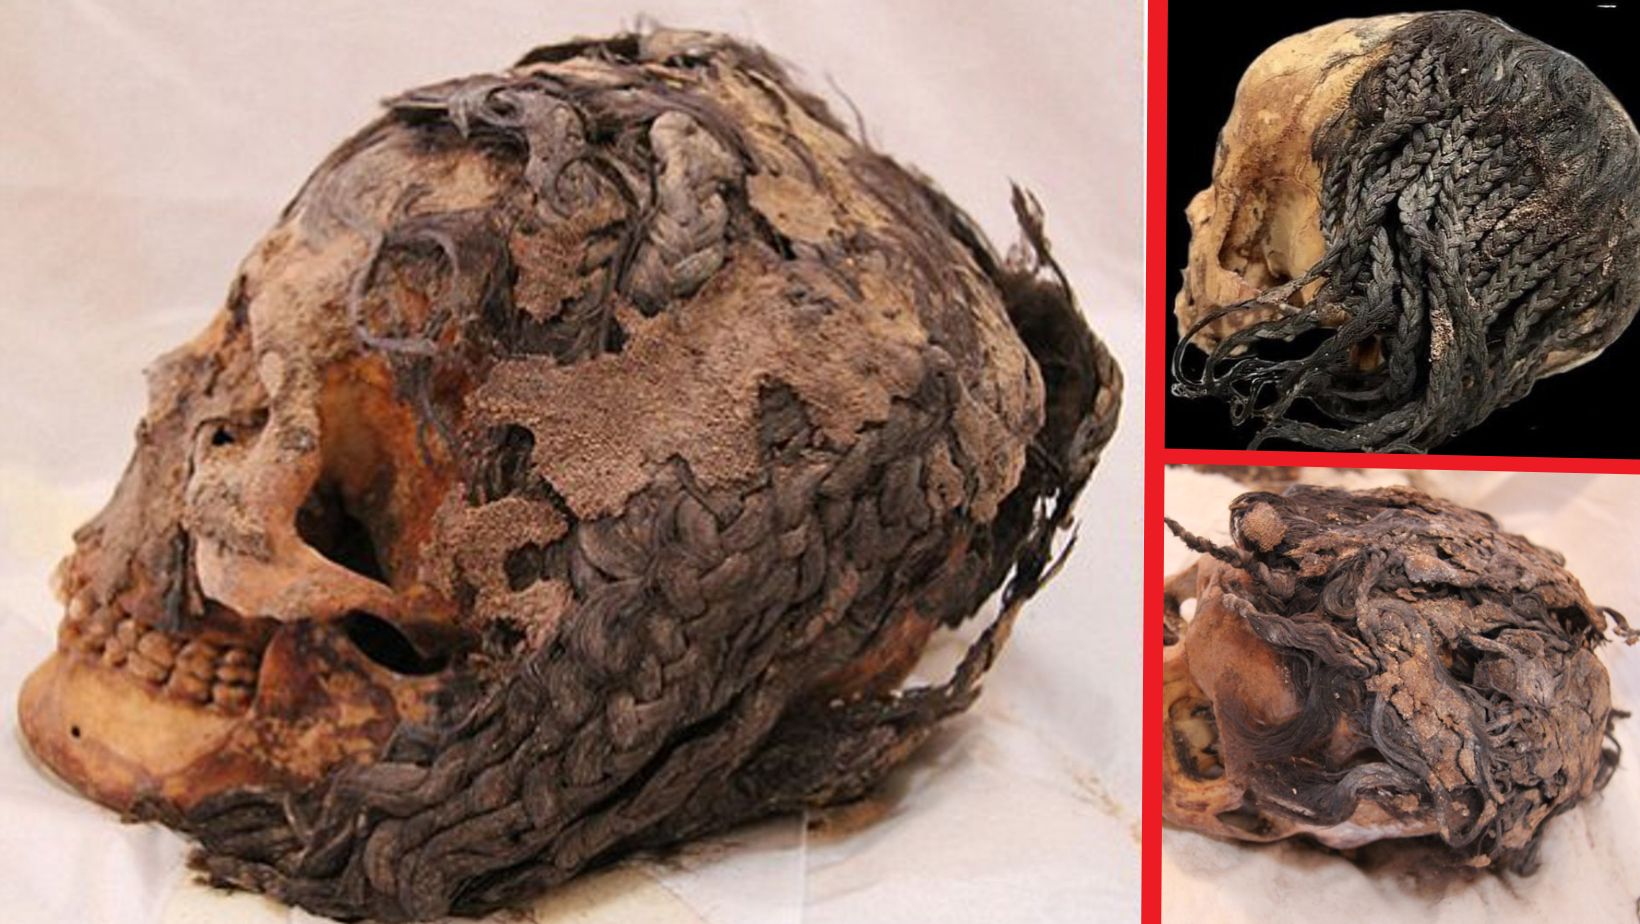 A 3,300-Year-Old Hairstyle on a Preserved Ancient Egyptian Head - BAP NEWS